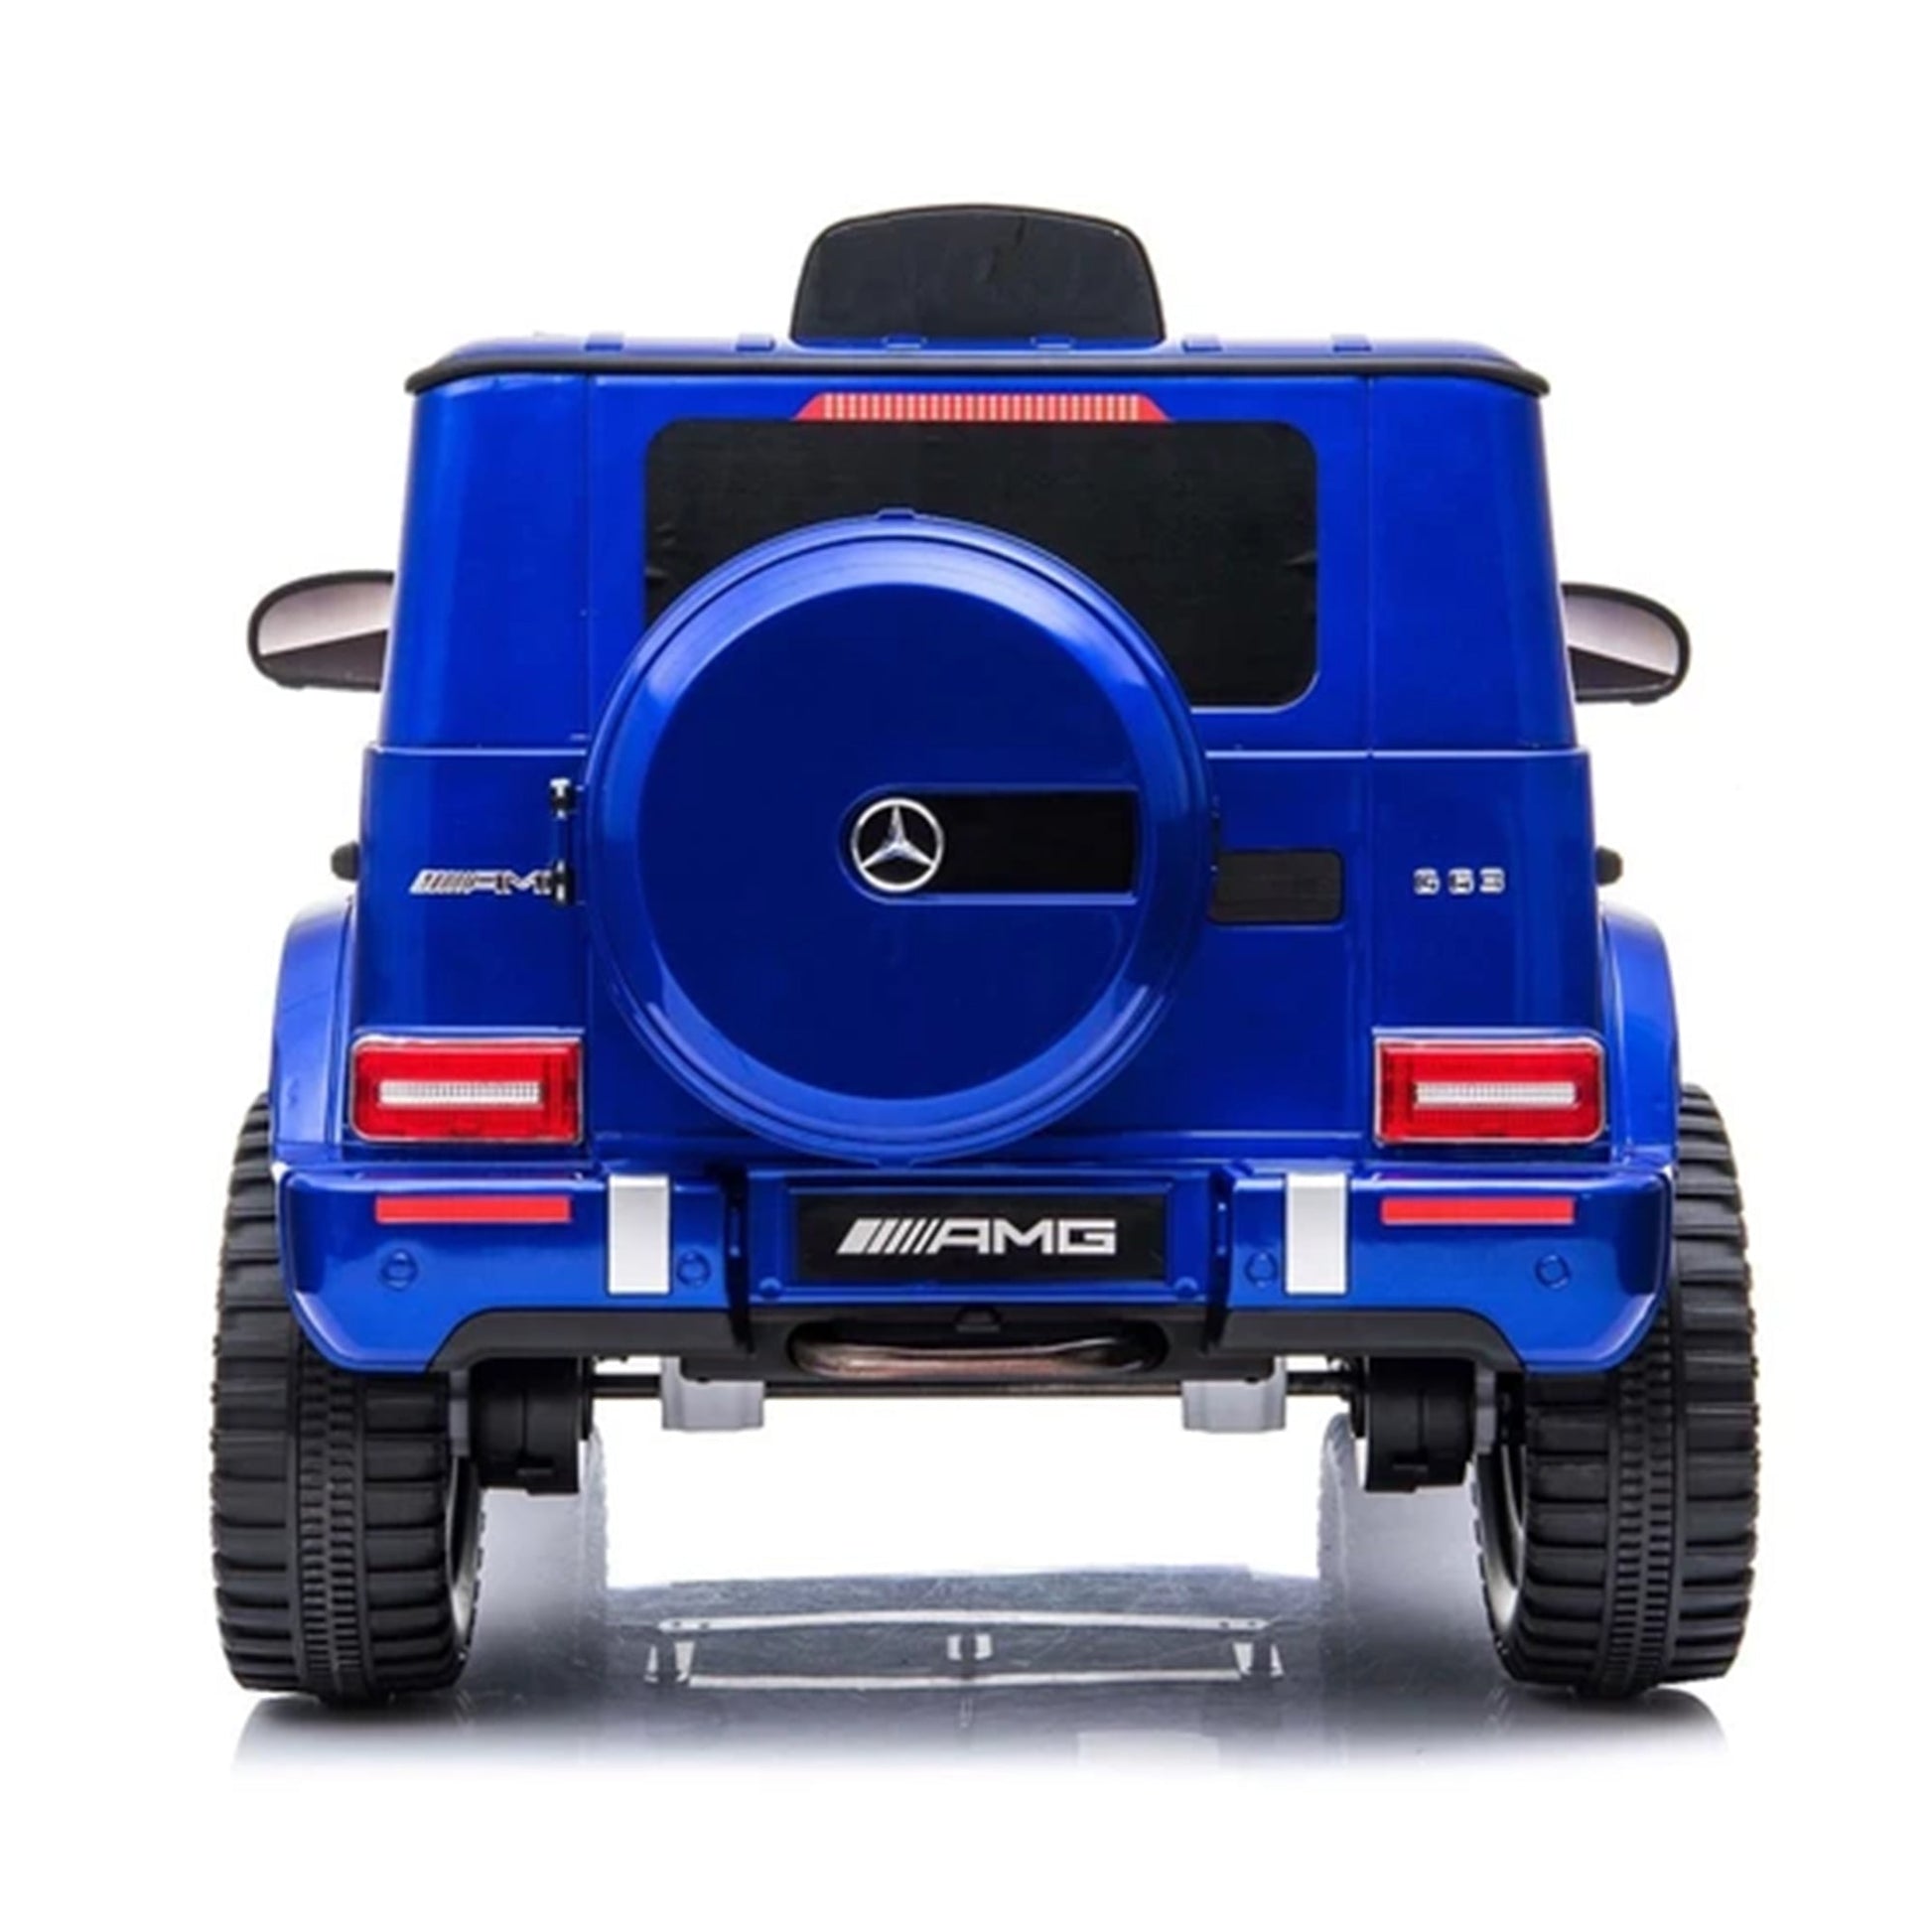 Blue Mercedes G63 AMG electric ride-on car toy for children on a white background